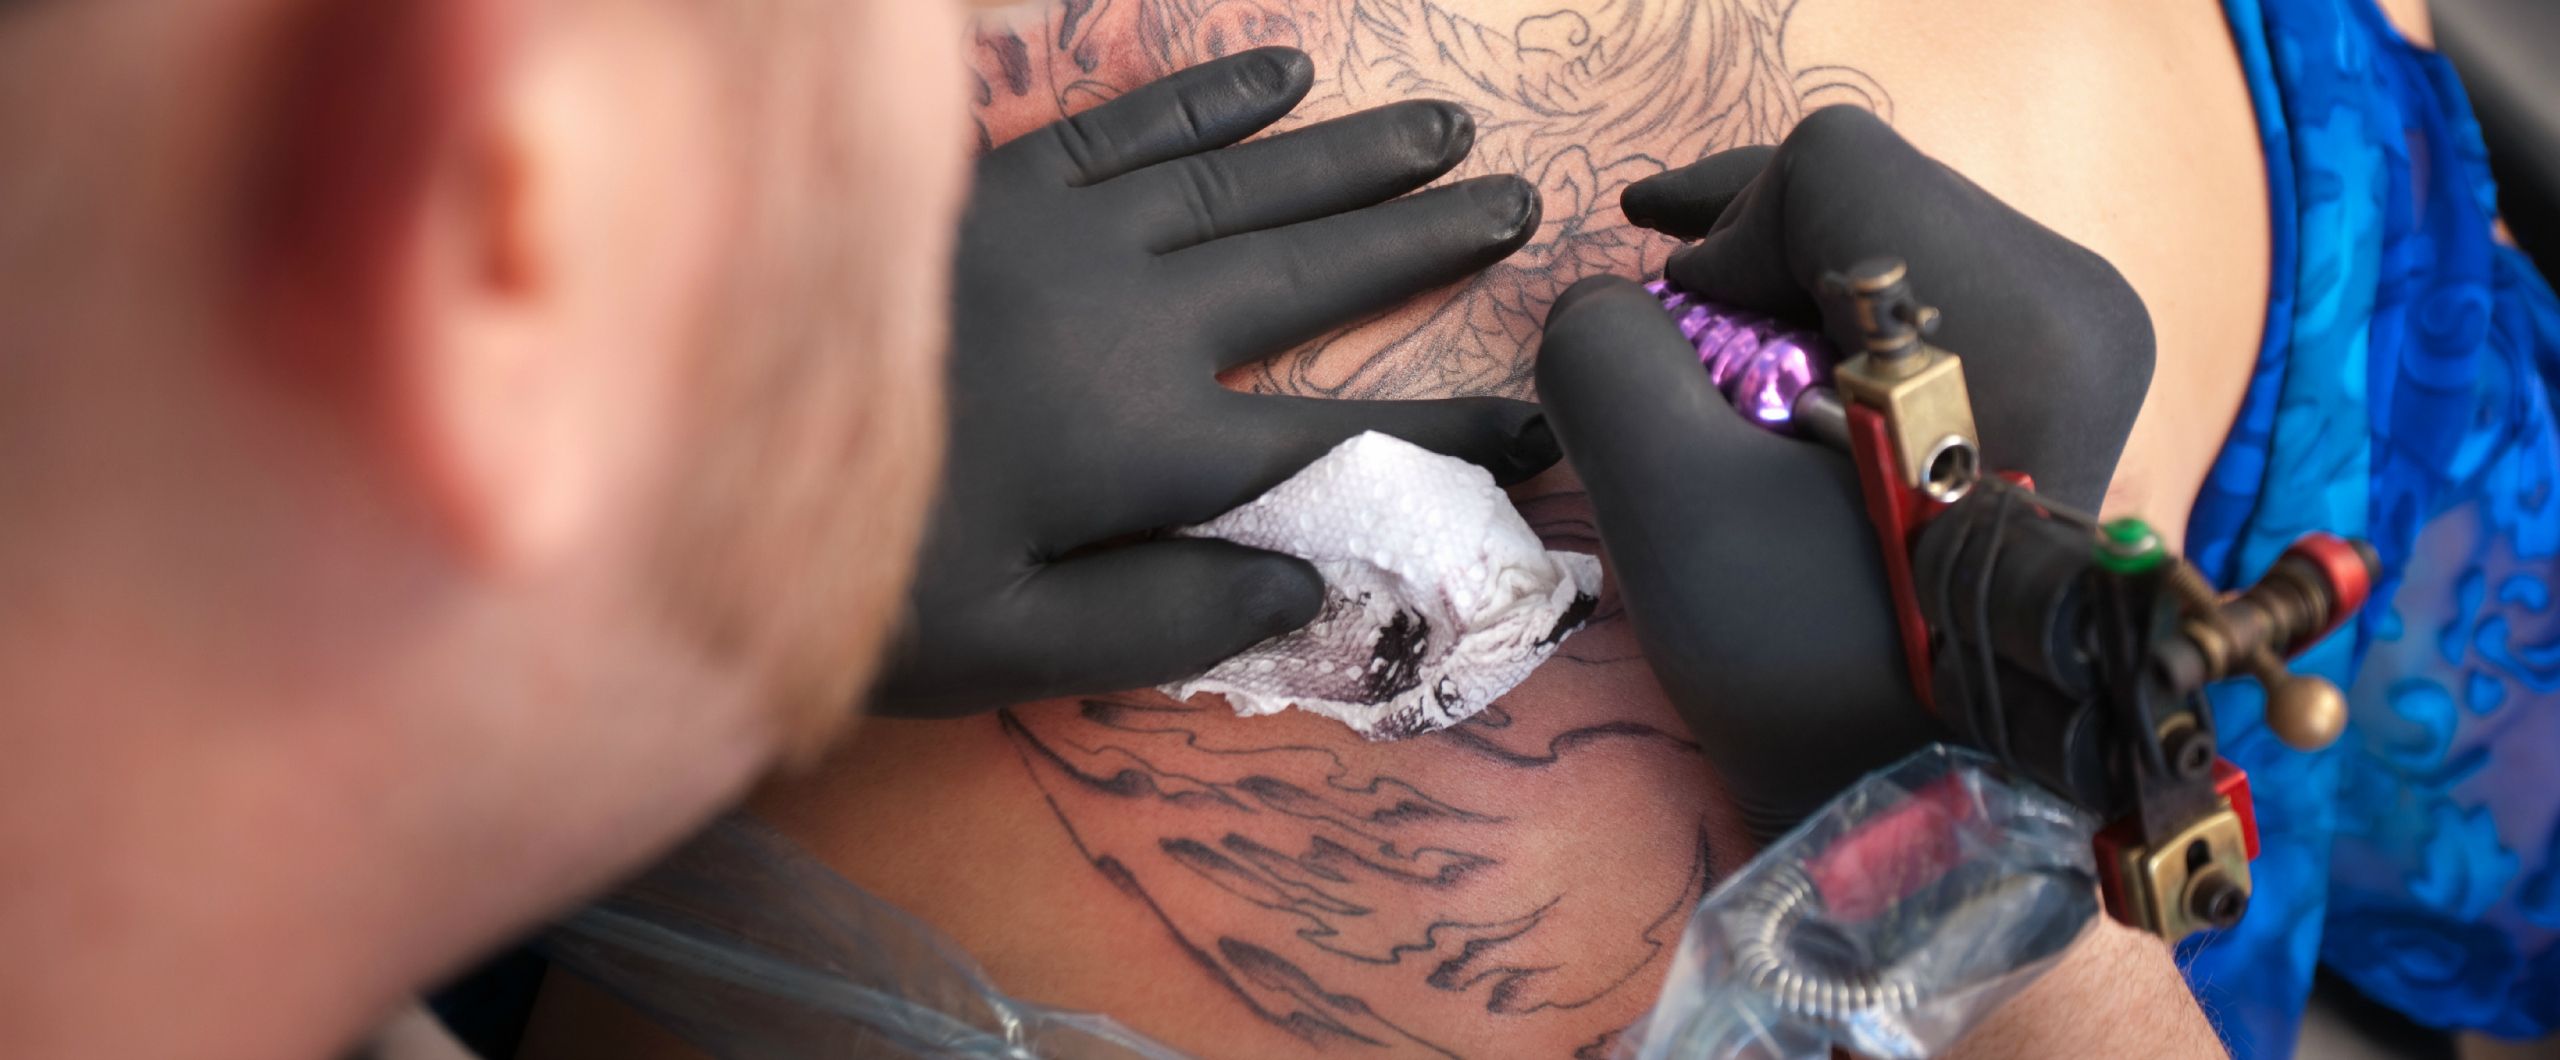 Tattoo Ink How It Got Under New Yorks Skin  The New York Times